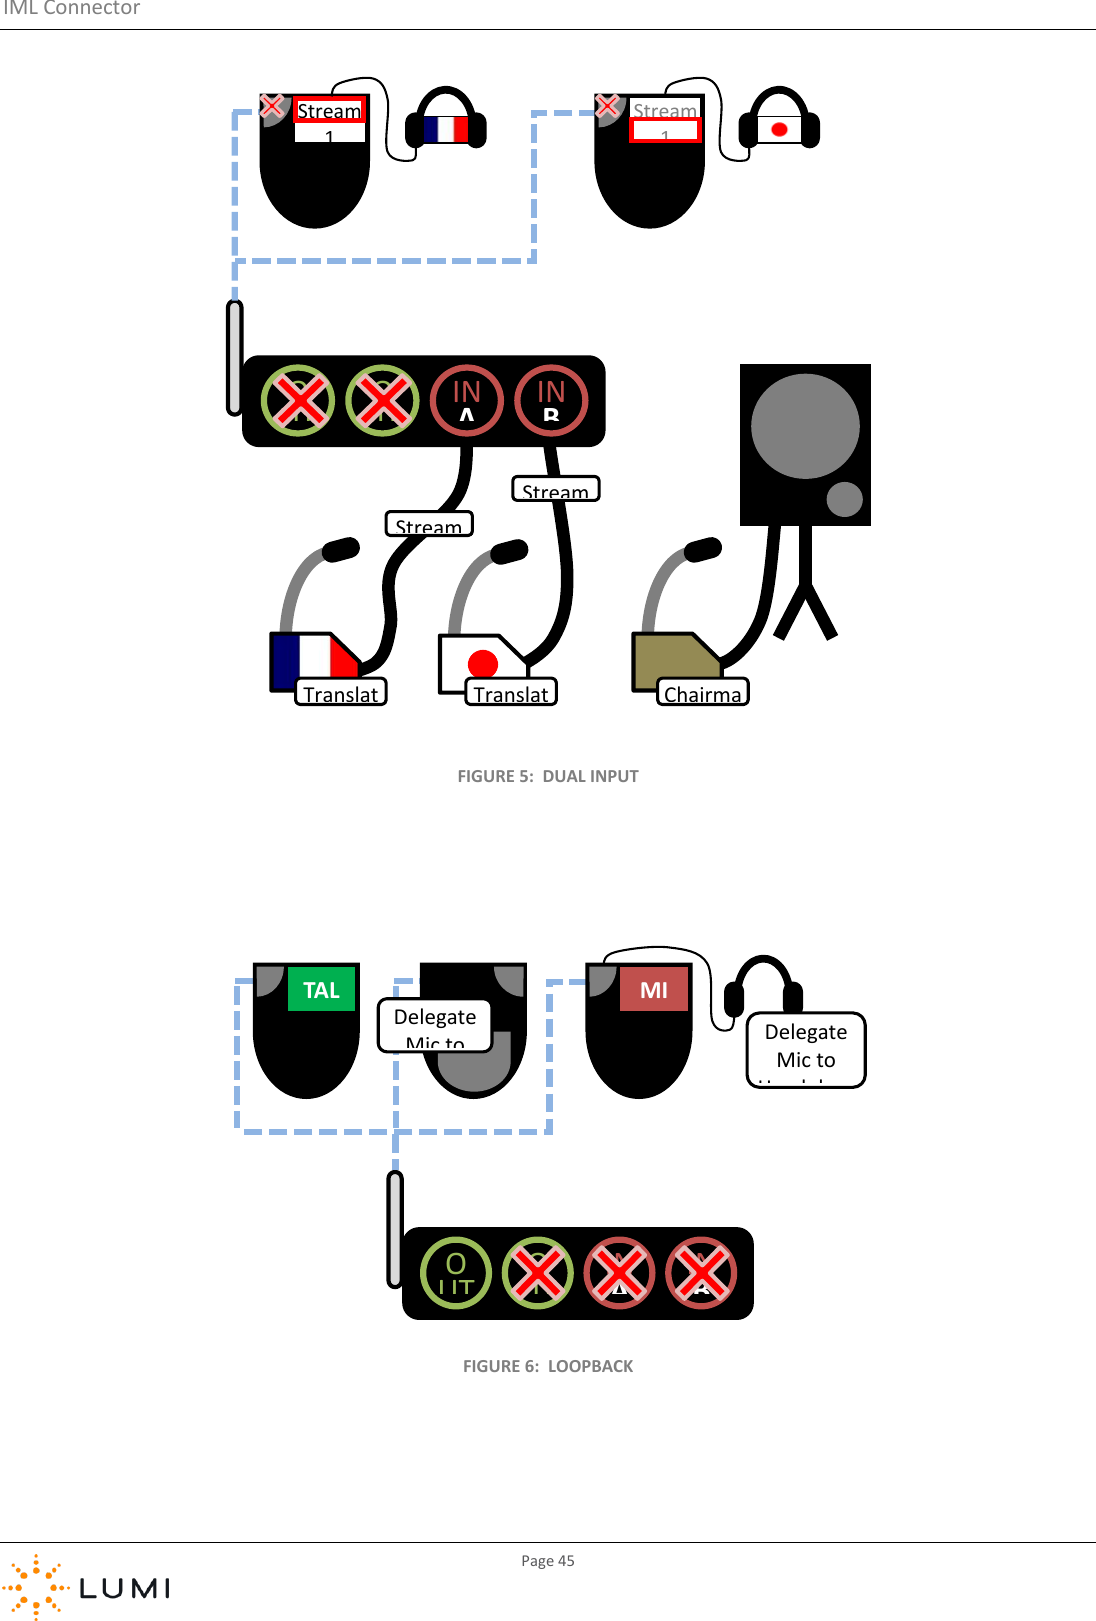 IML Connector         Page 45   FIGURE 5:  DUAL INPUT    FIGURE 6:  LOOPBACK   OUT AOUTBIN A IN B Stream Stream Stream 1 Stream 1 Translator Translator Chairman OUT AOUT BIN A IN B TALK MIC Delegate Mic to Delegate Mic to Headphon